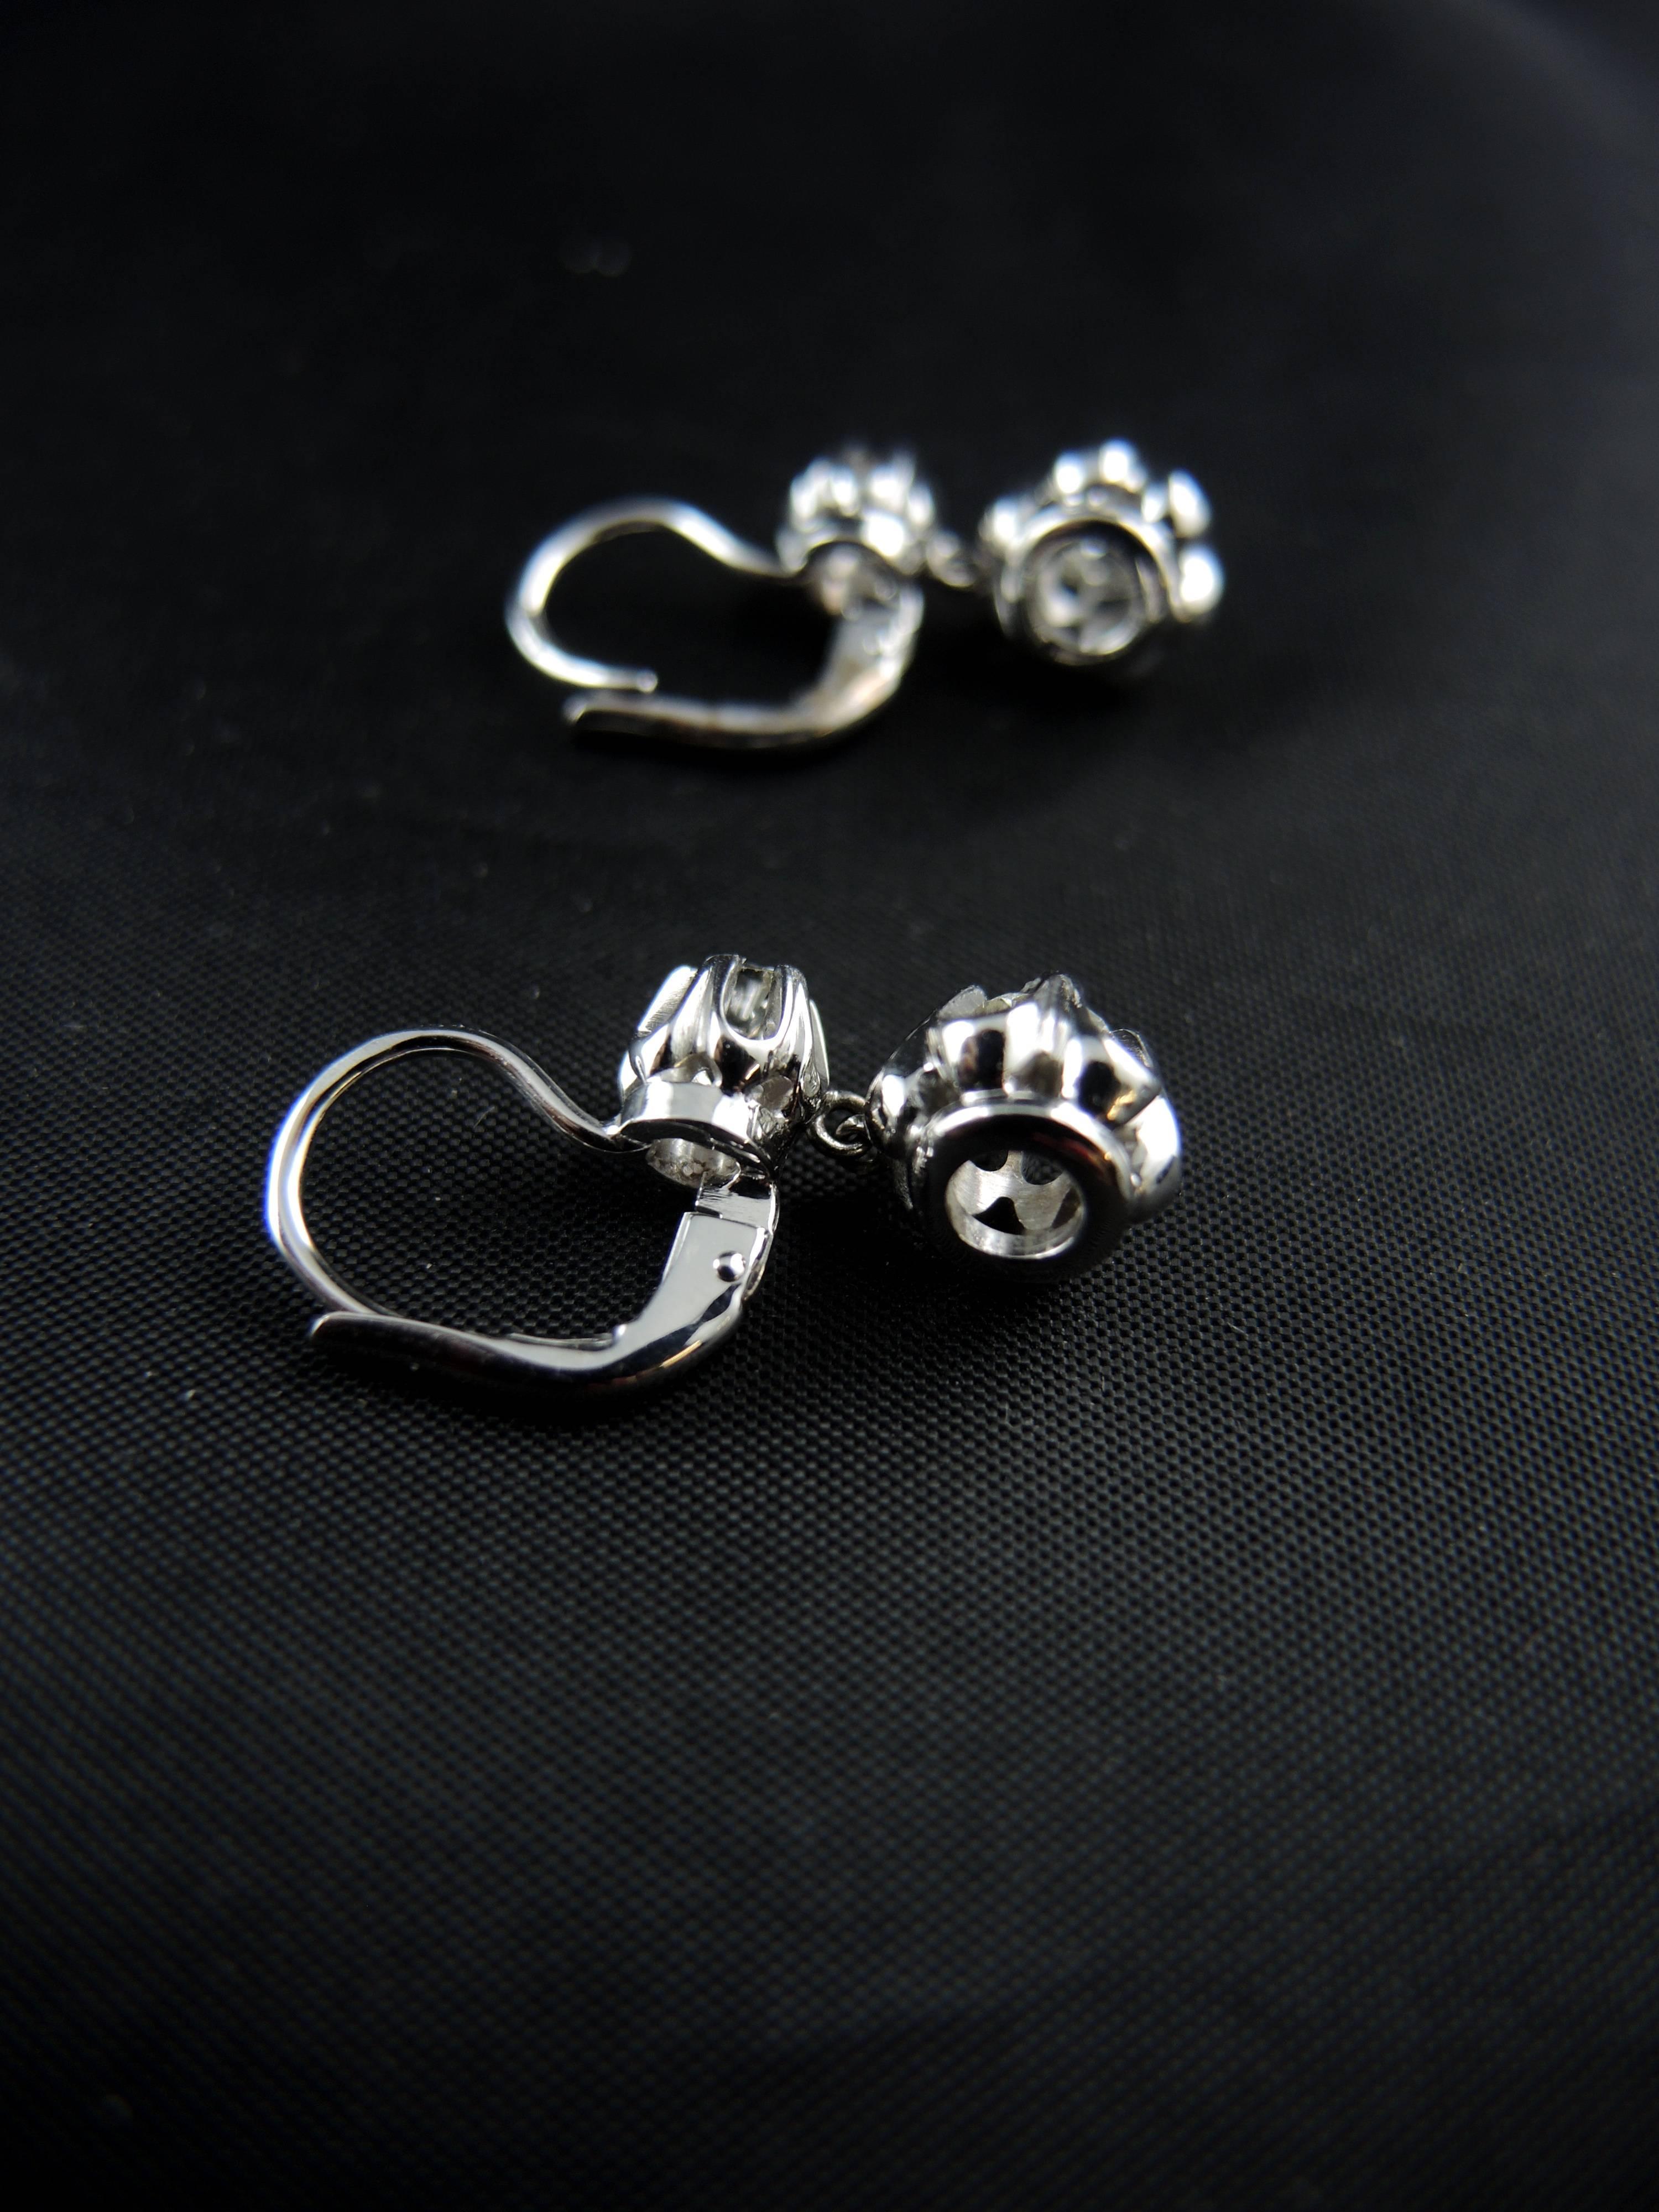 Women's Antique Earrings in White Gold and Diamonds 1.00 Carat